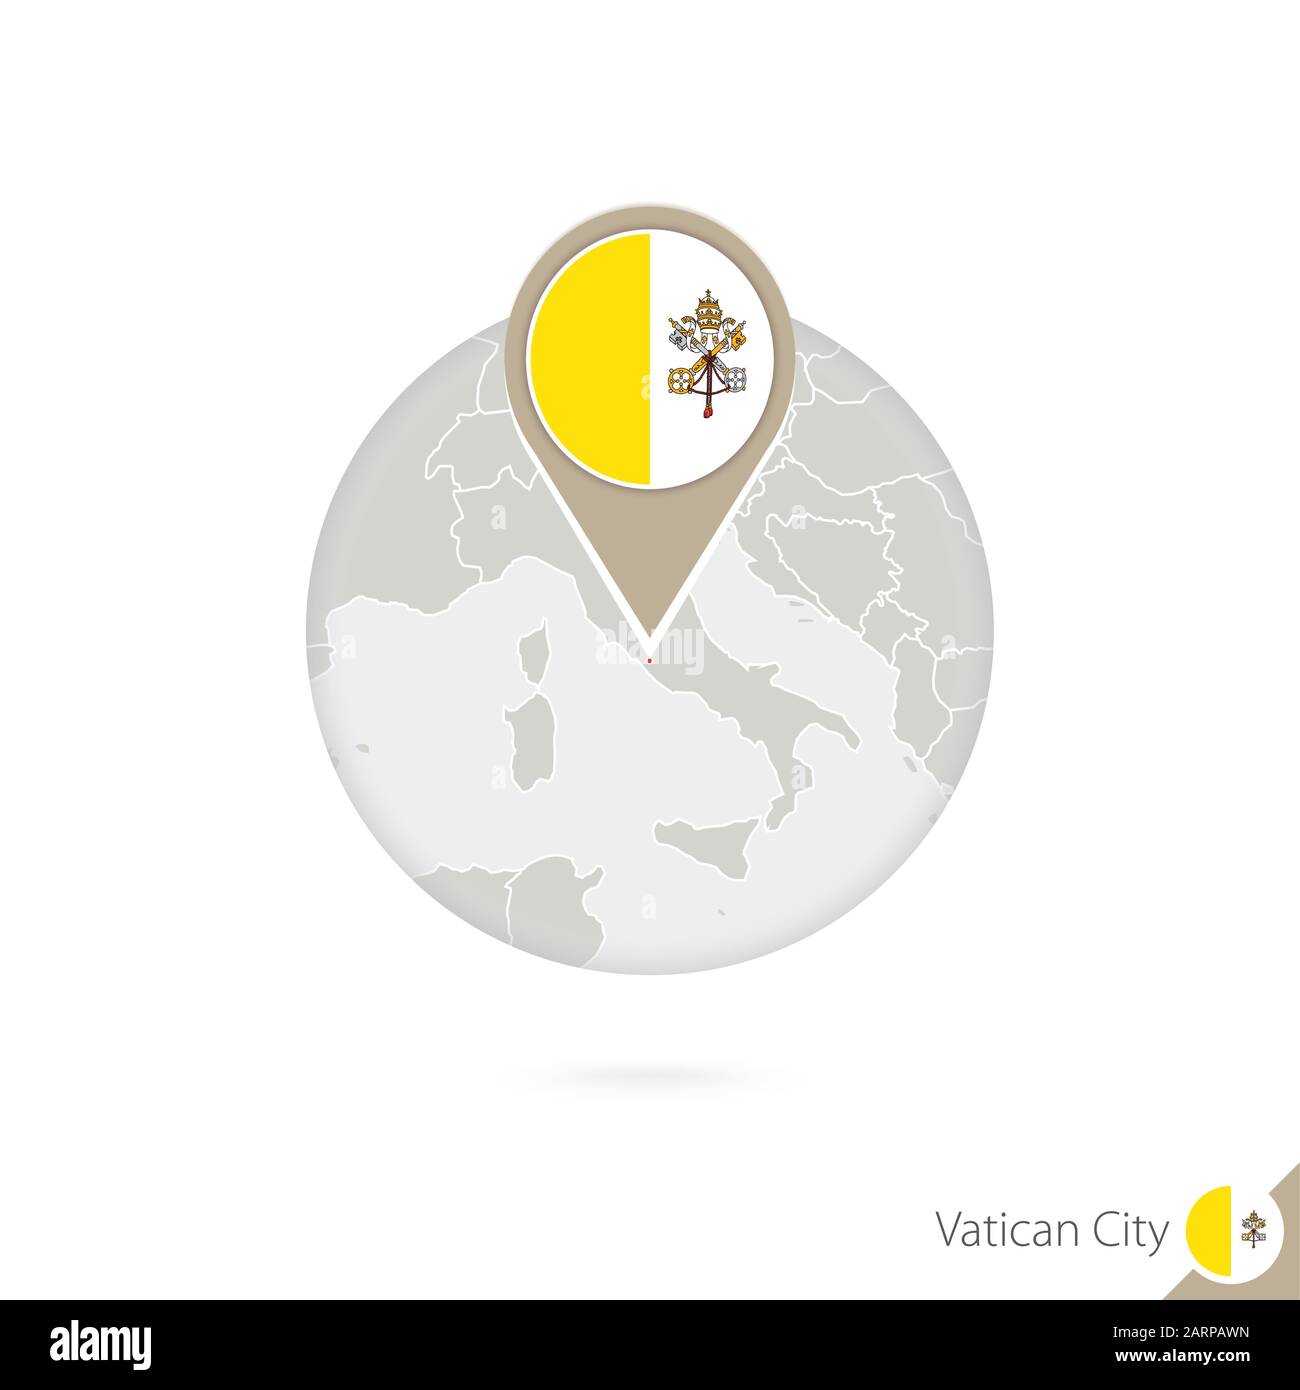 Vatican City map and flag in circle. Map of Vatican City, Vatican City flag pin. Map of Vatican City in the style of the globe. Vector Illustration. Stock Vector